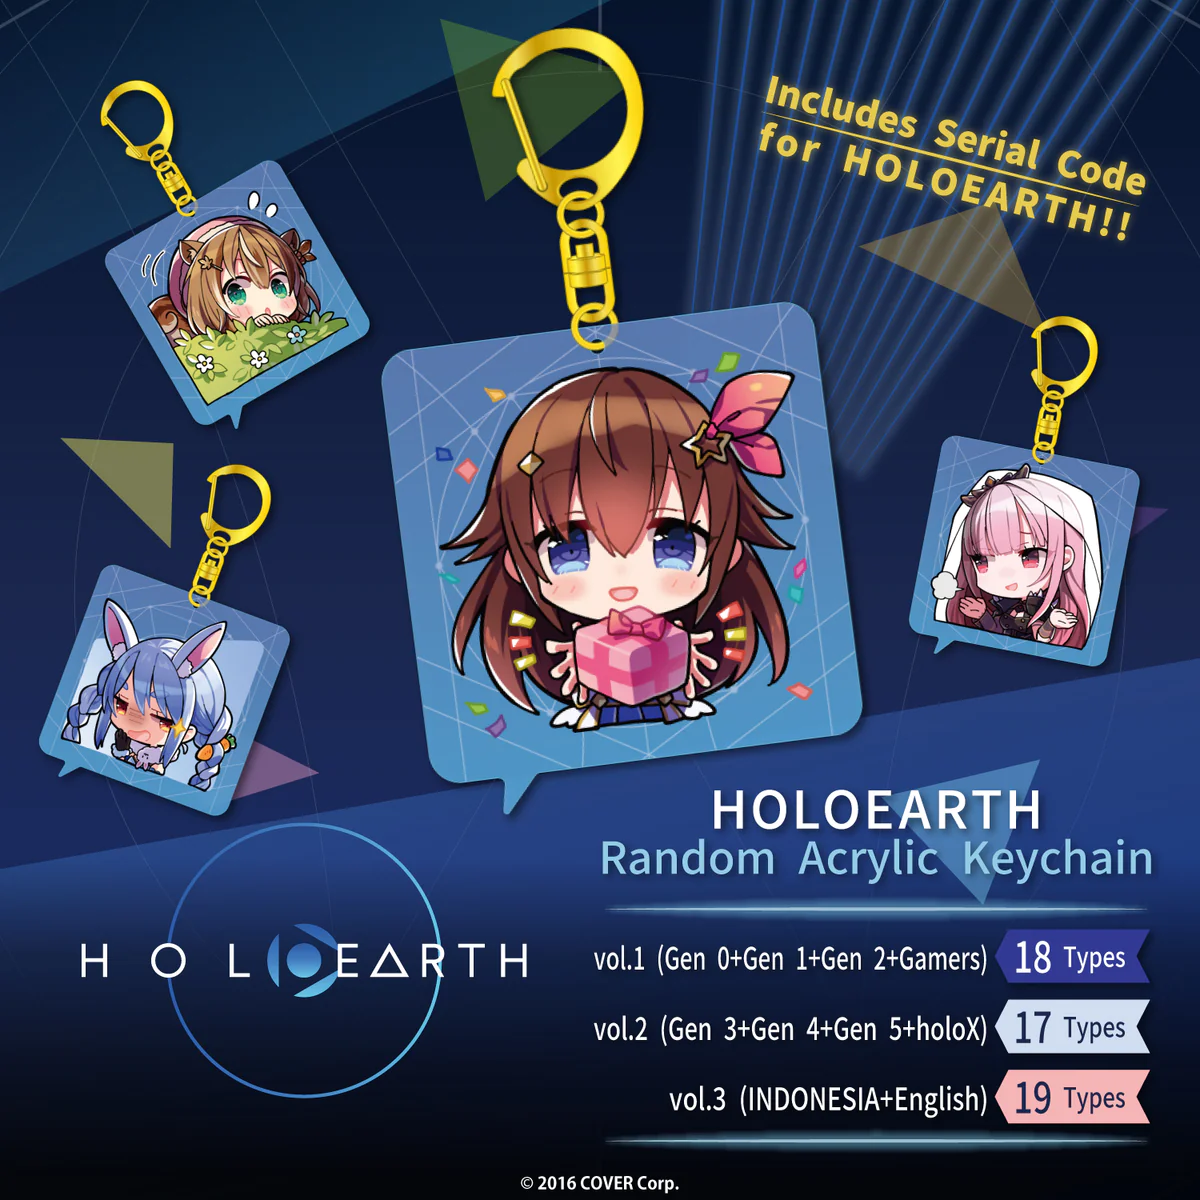 About Items that can be Exchanged for the “Holoearth Random Acrylic Keychain” Serial Code